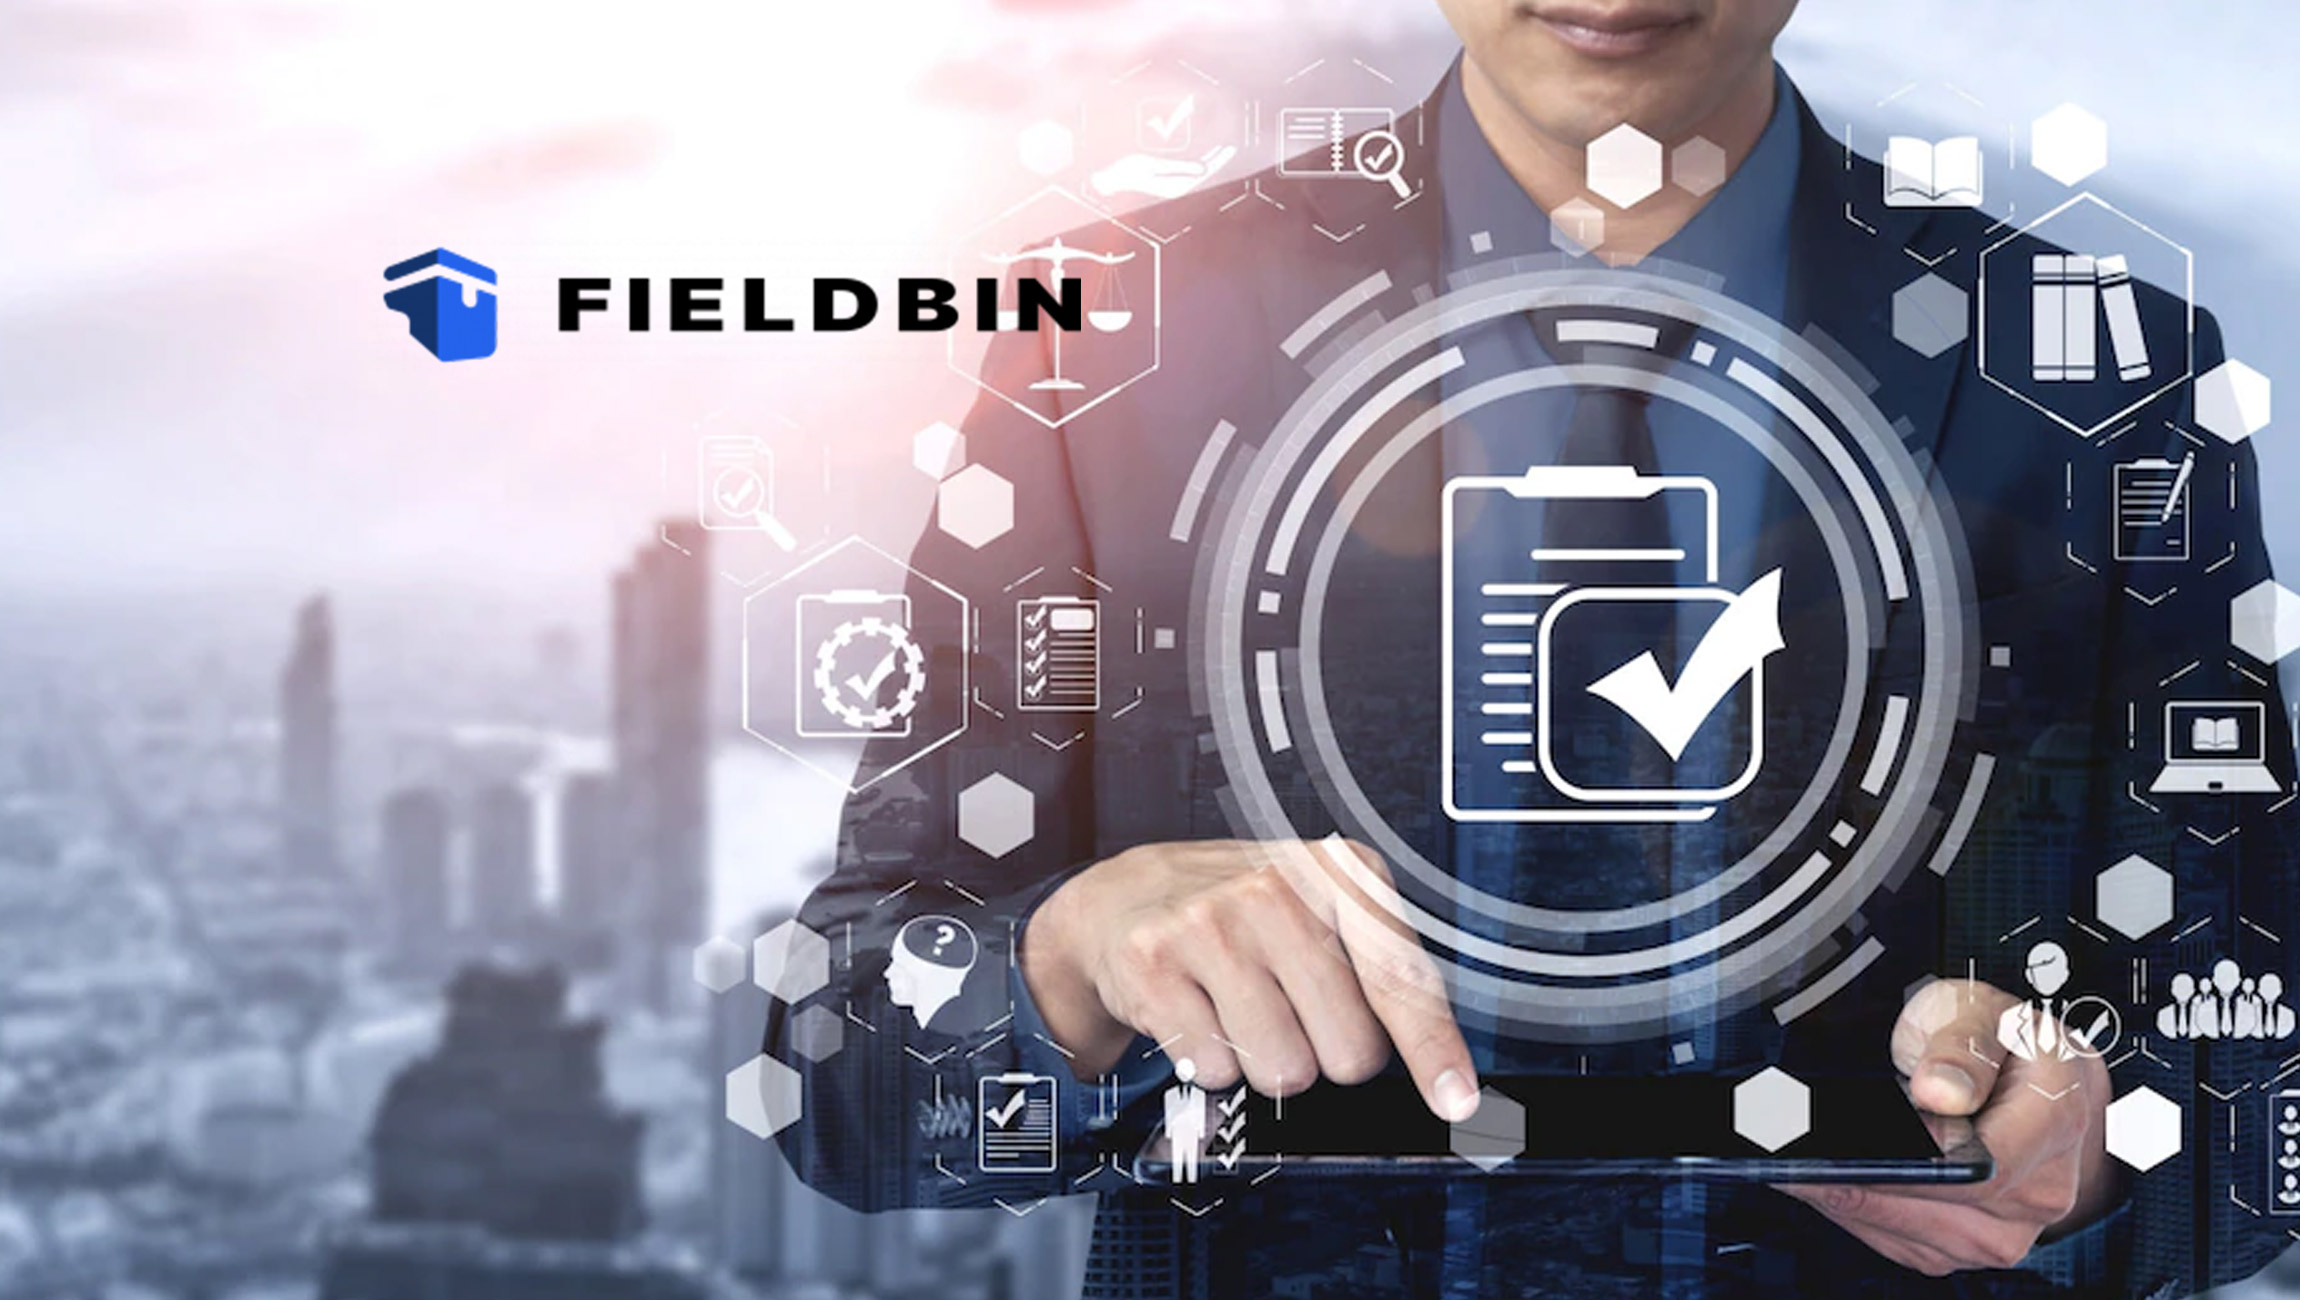 FieldBin Powers Up Its Field Service Management Software with Key New Features